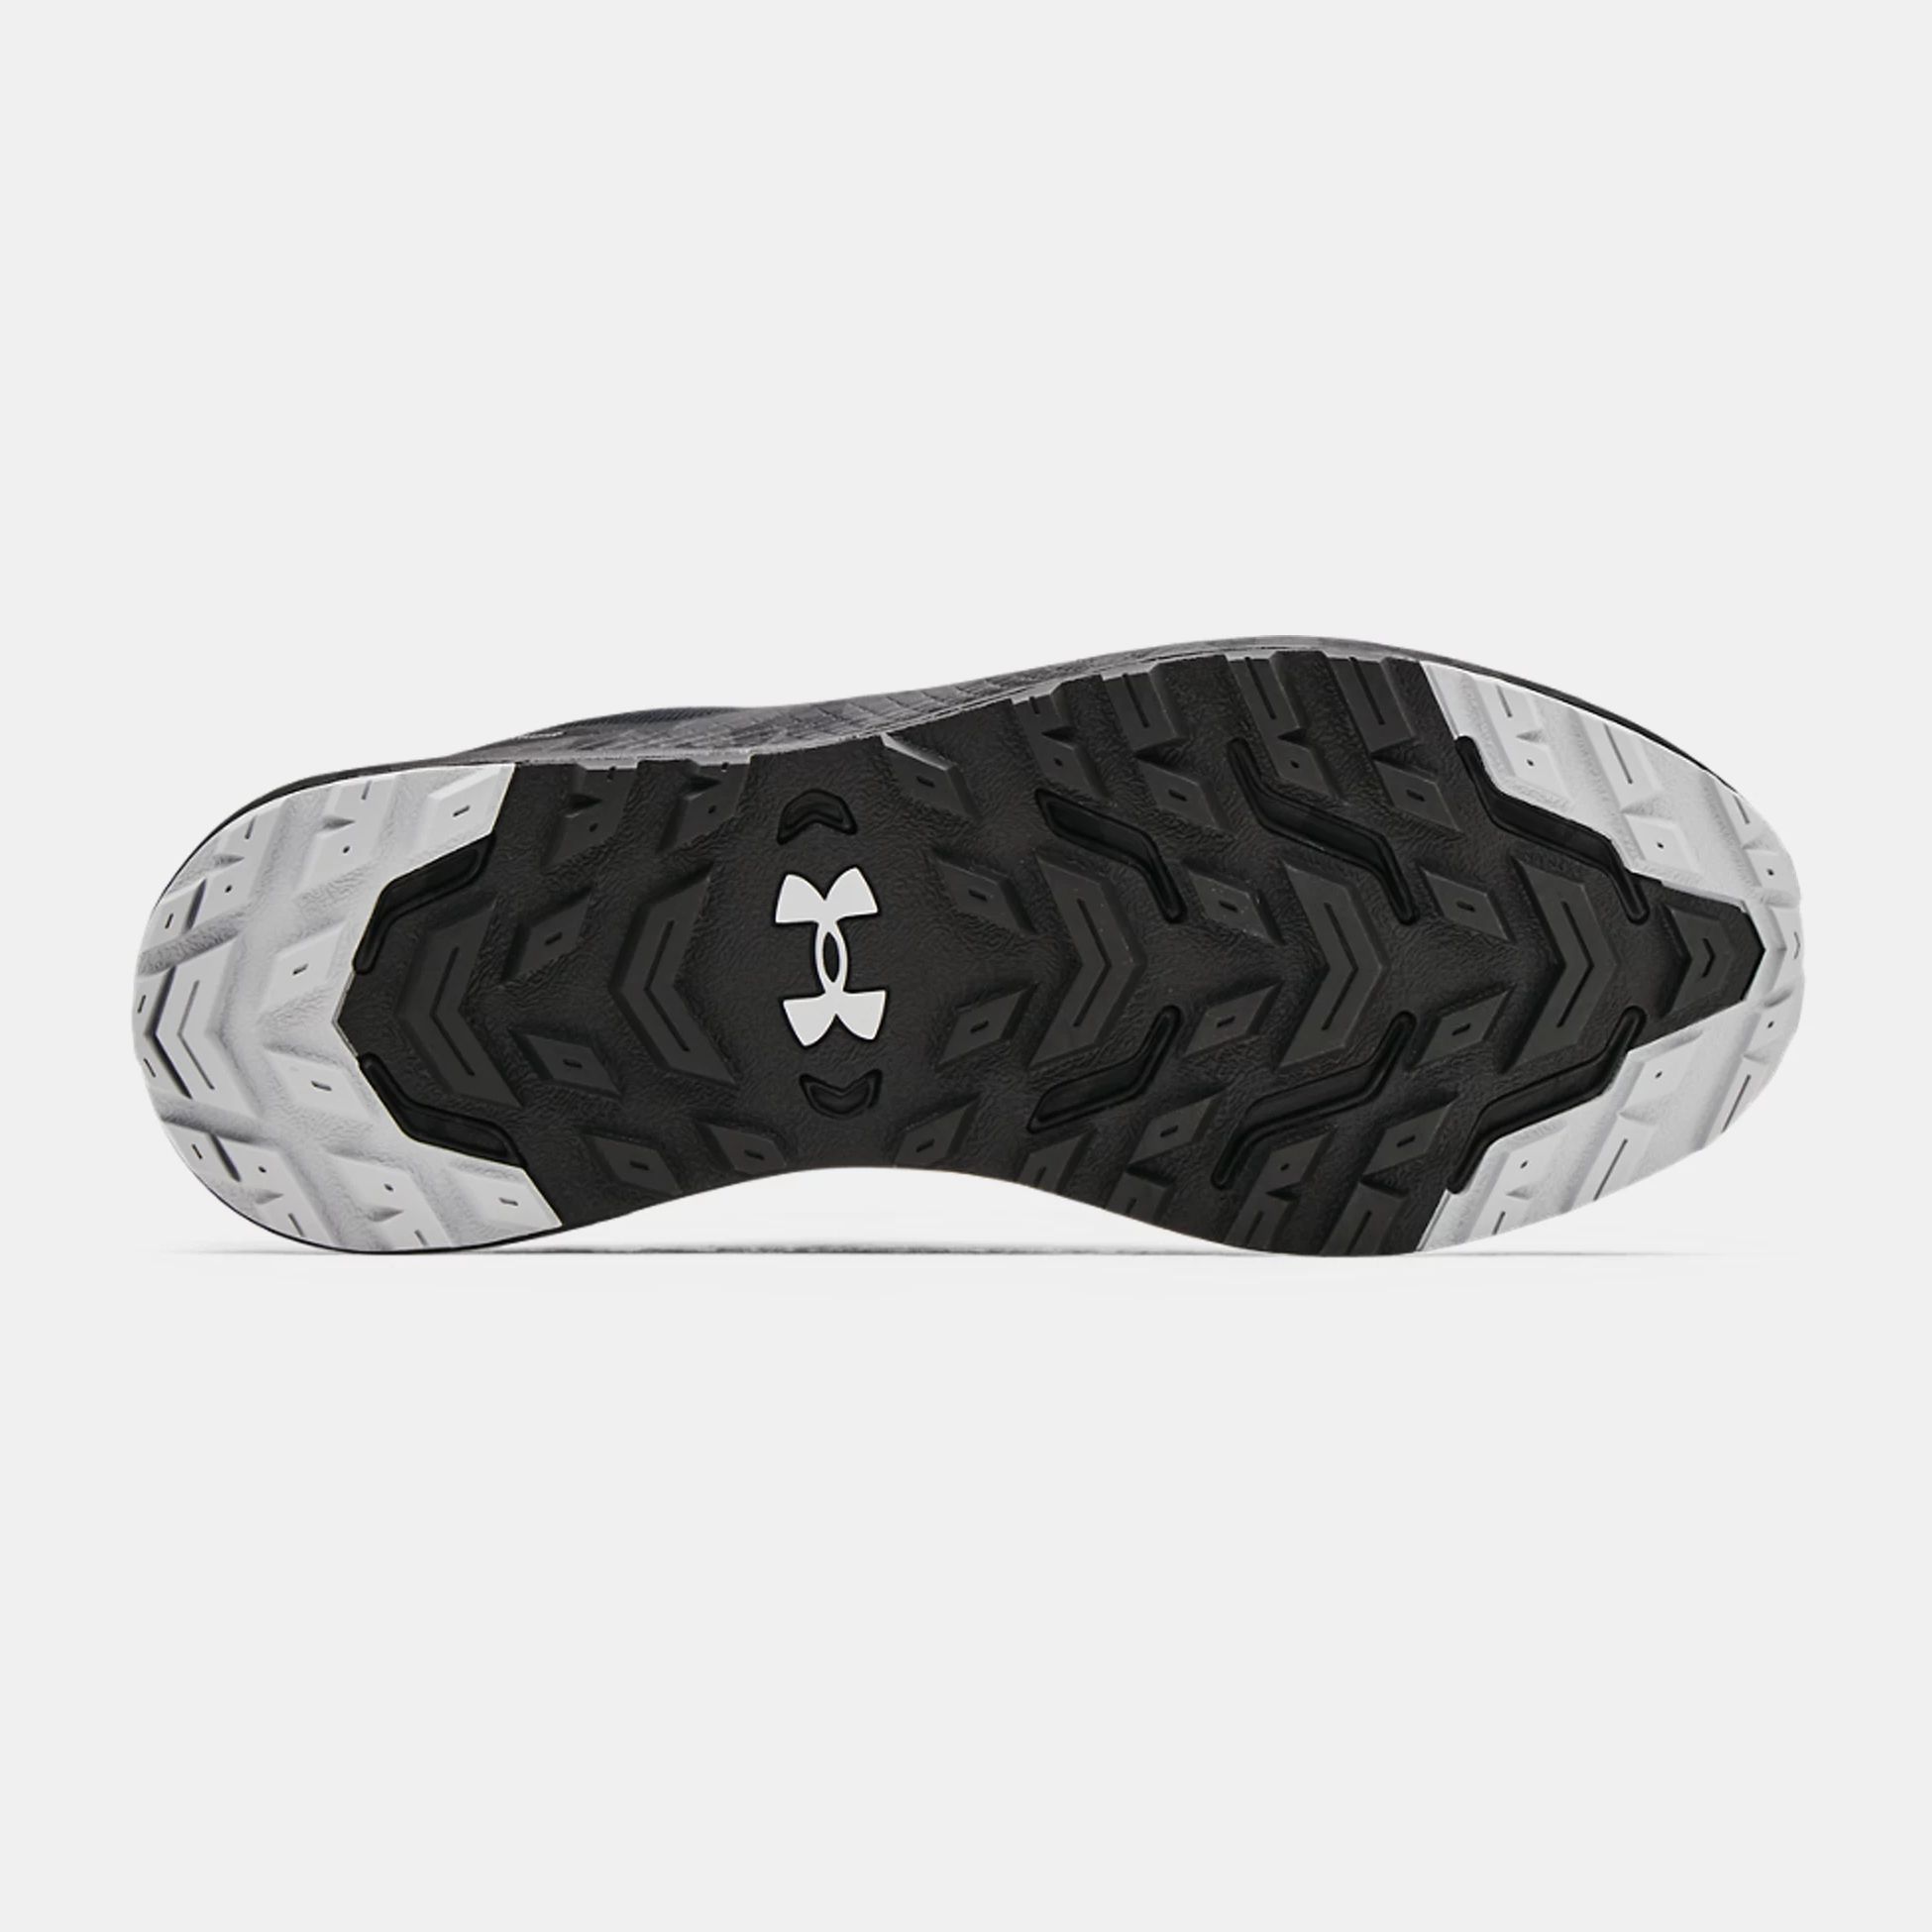 Incaltaminte De Alergare -  under armour UA Charged Bandit Trail 2 Running Shoes